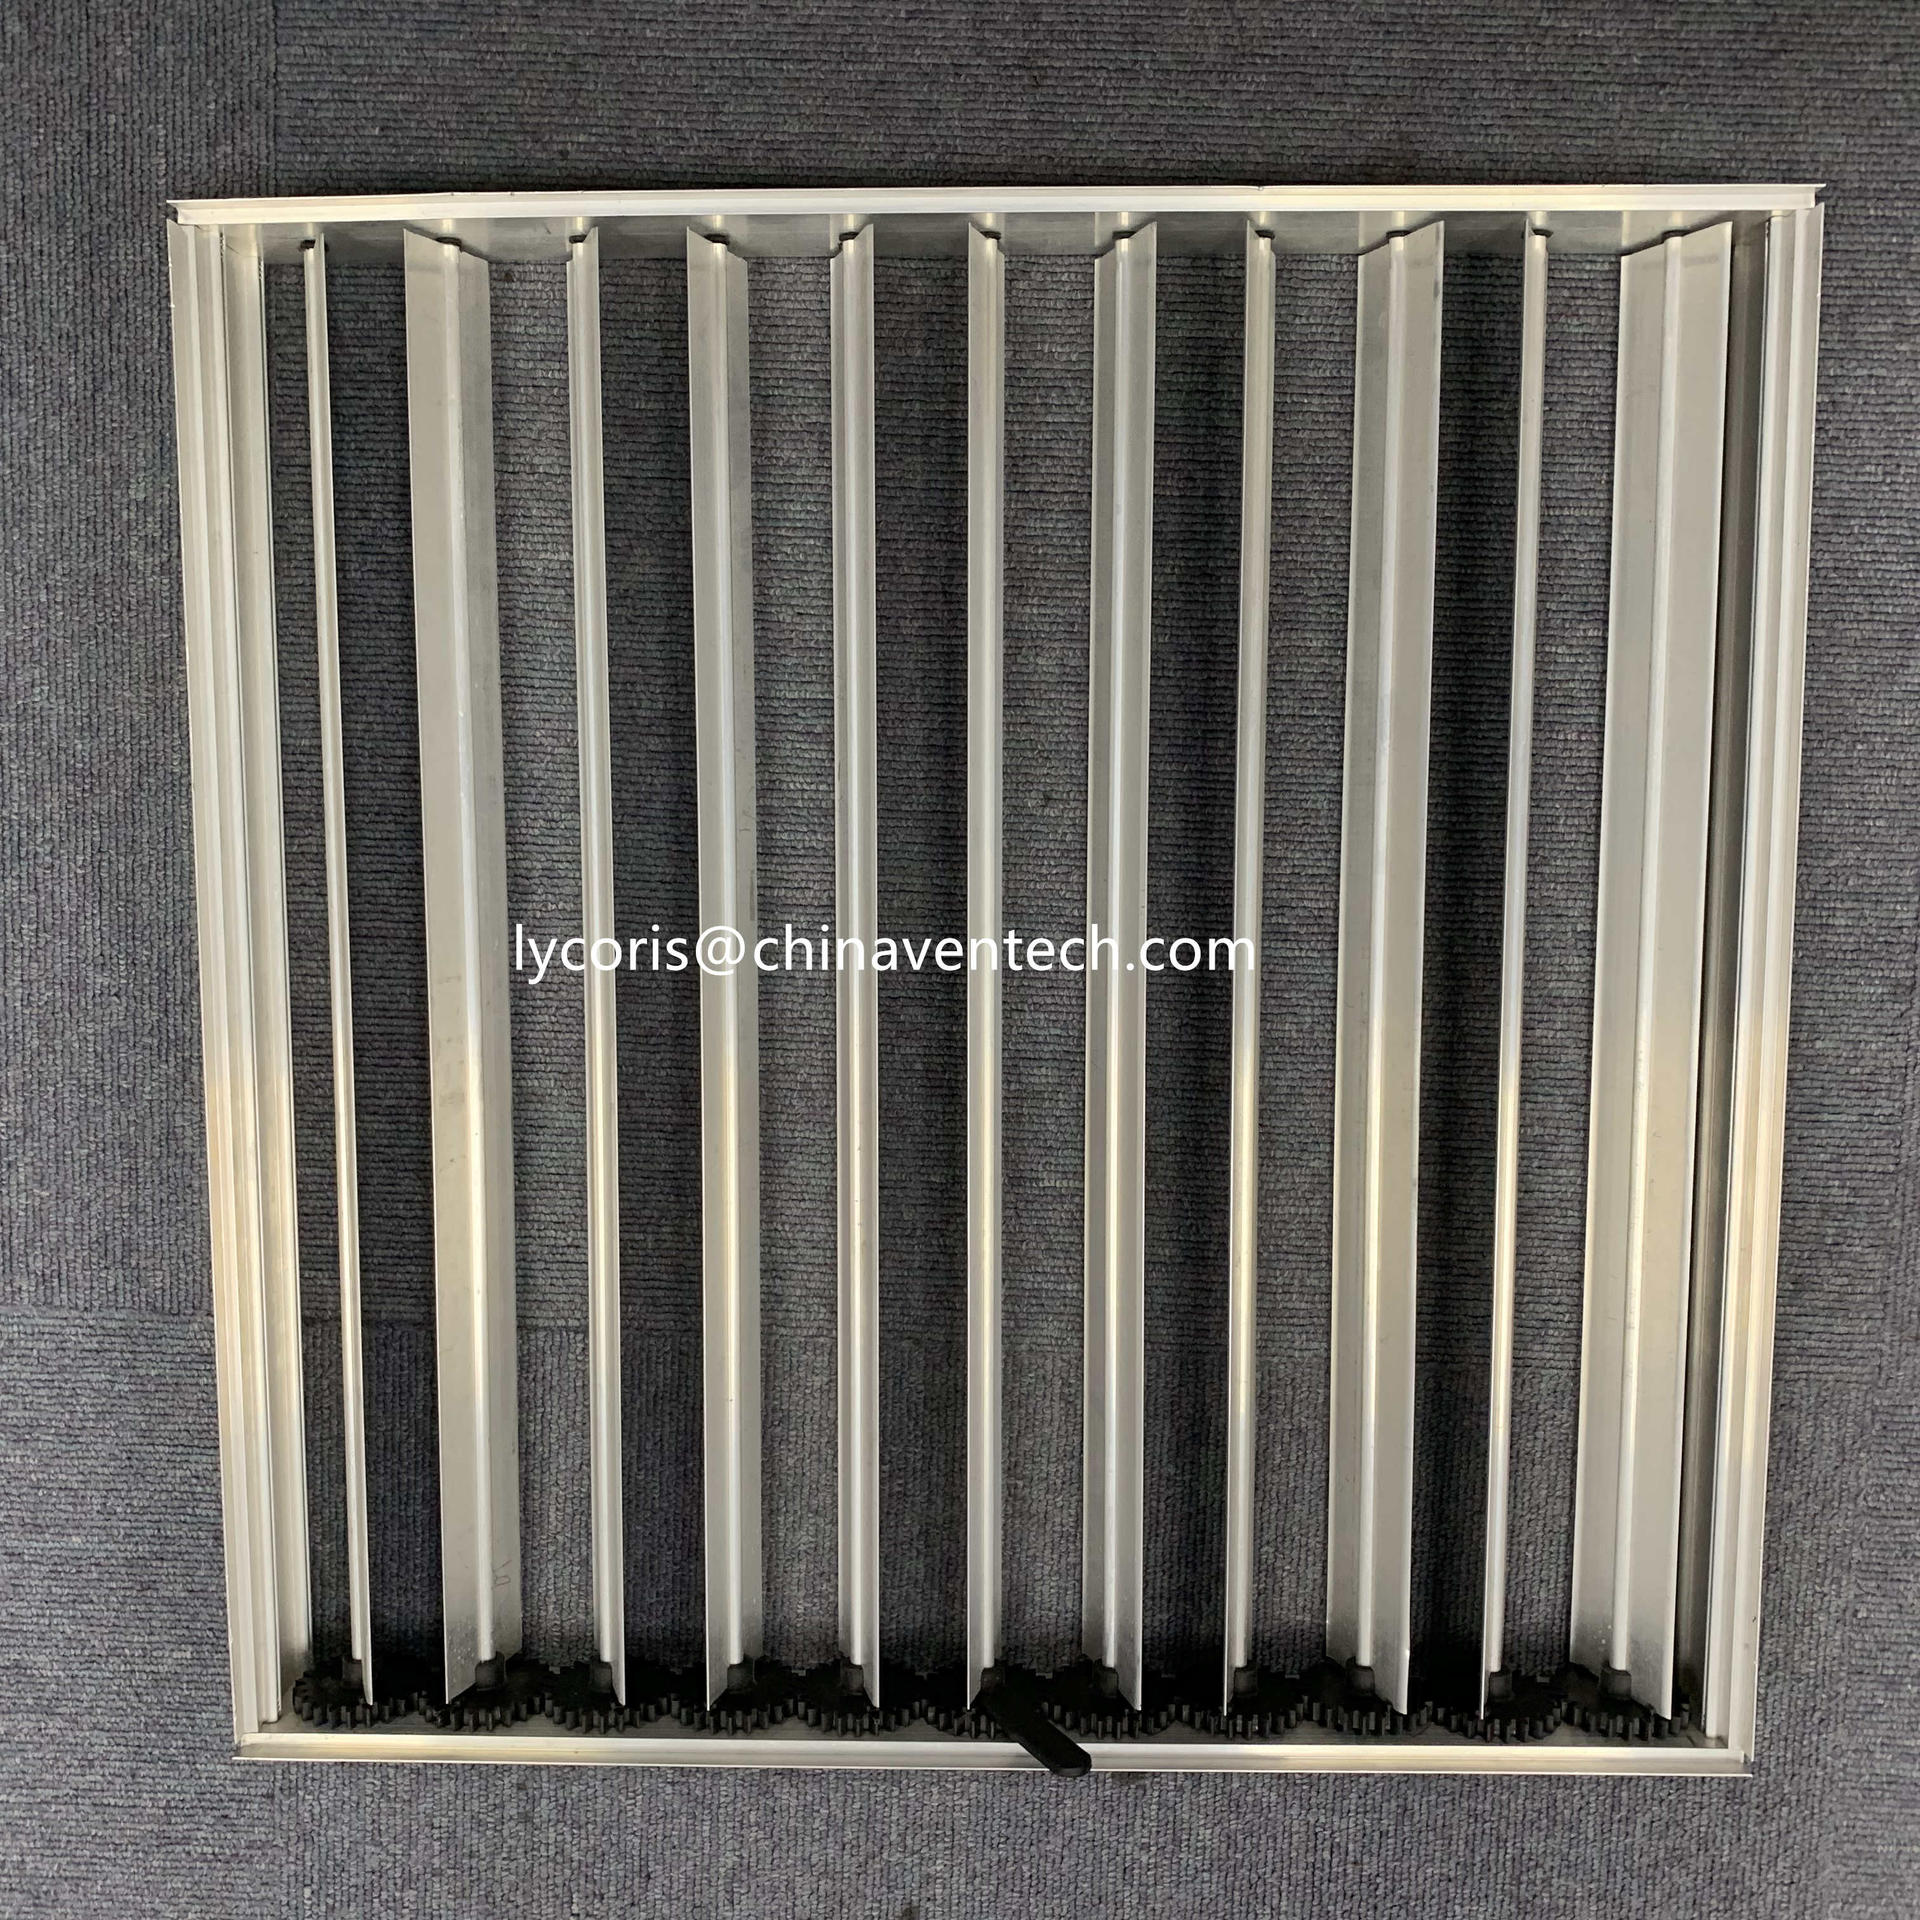 Ventech Supply Air Grille Diffuser Oppose Blade Damper Ventilation Square Ceiling Air Duct Manual Ceiling Damper